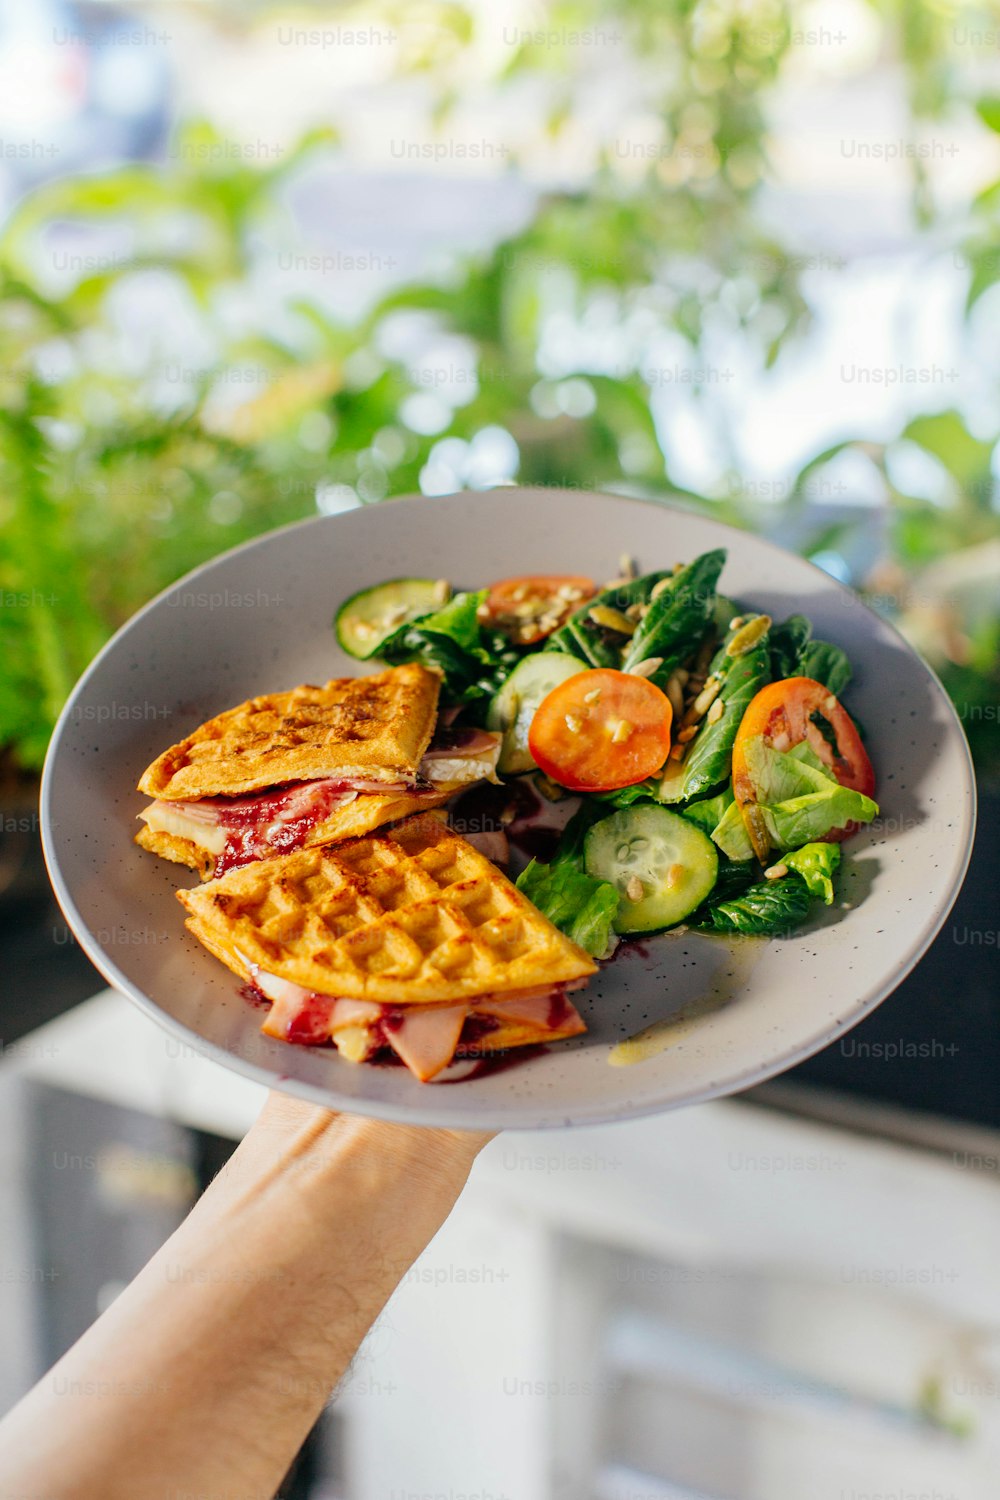 a person holding a plate of food with waffles and vegetables